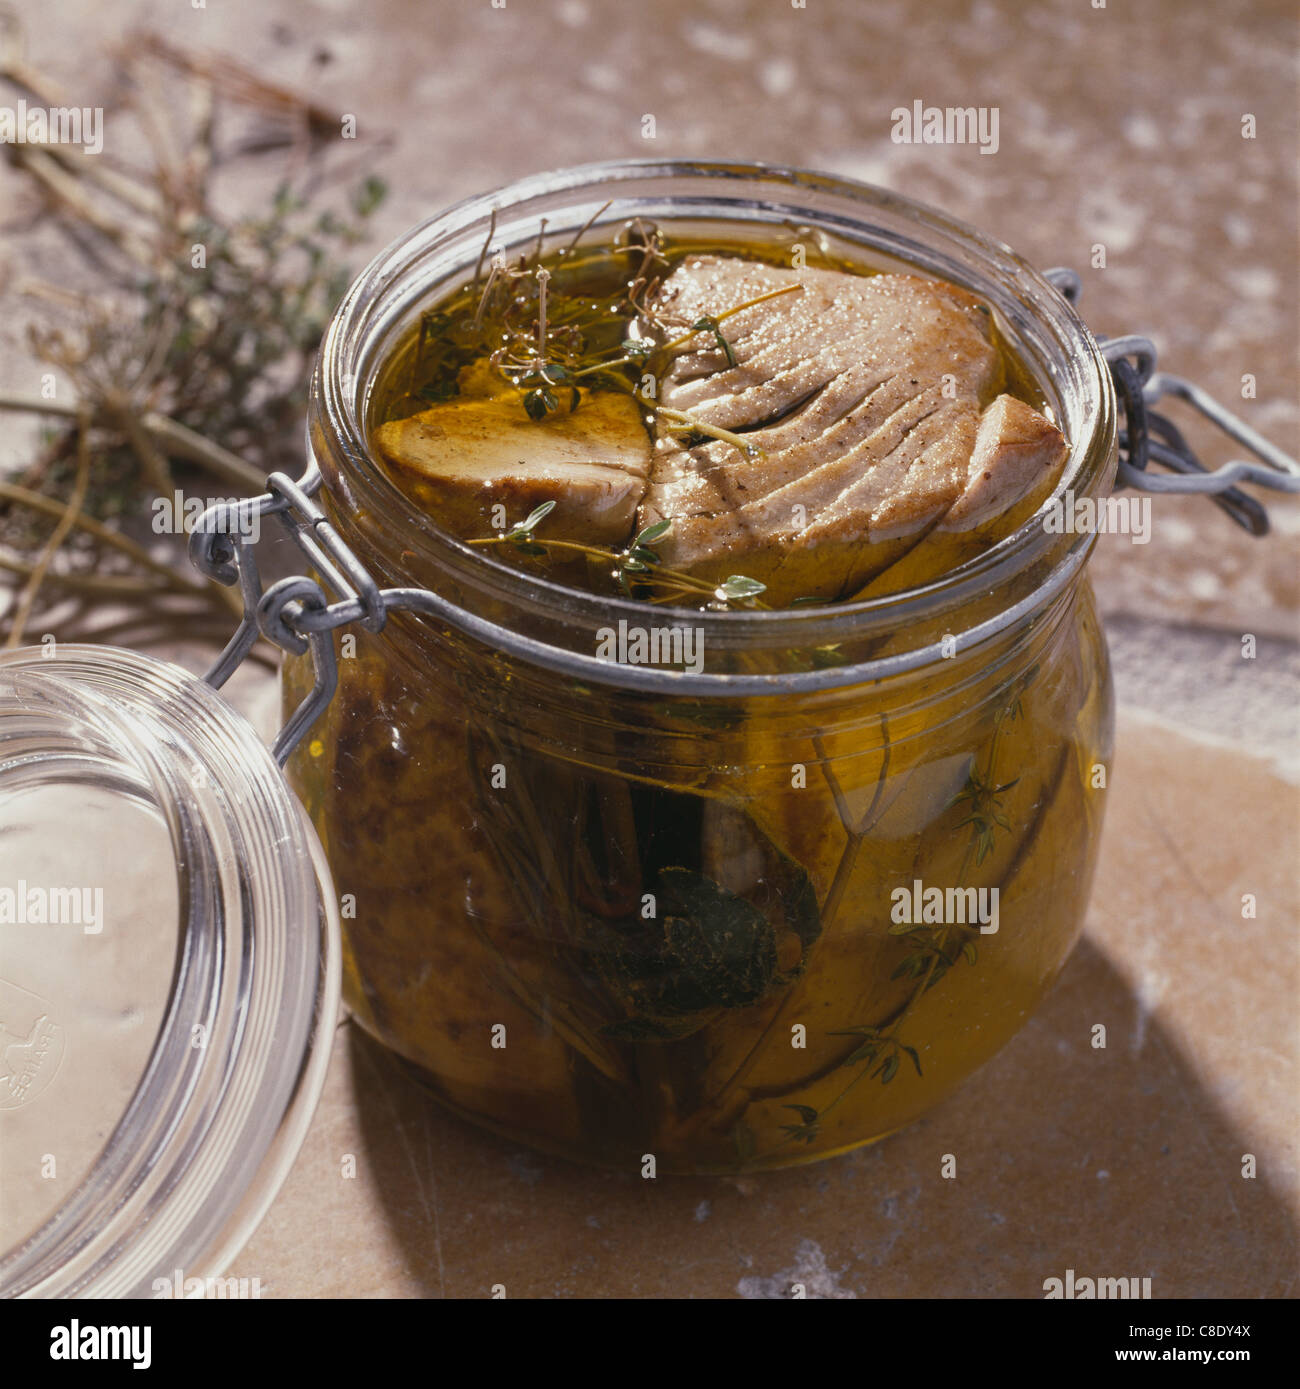 Tuna marinated in olive oil with herbs Stock Photo